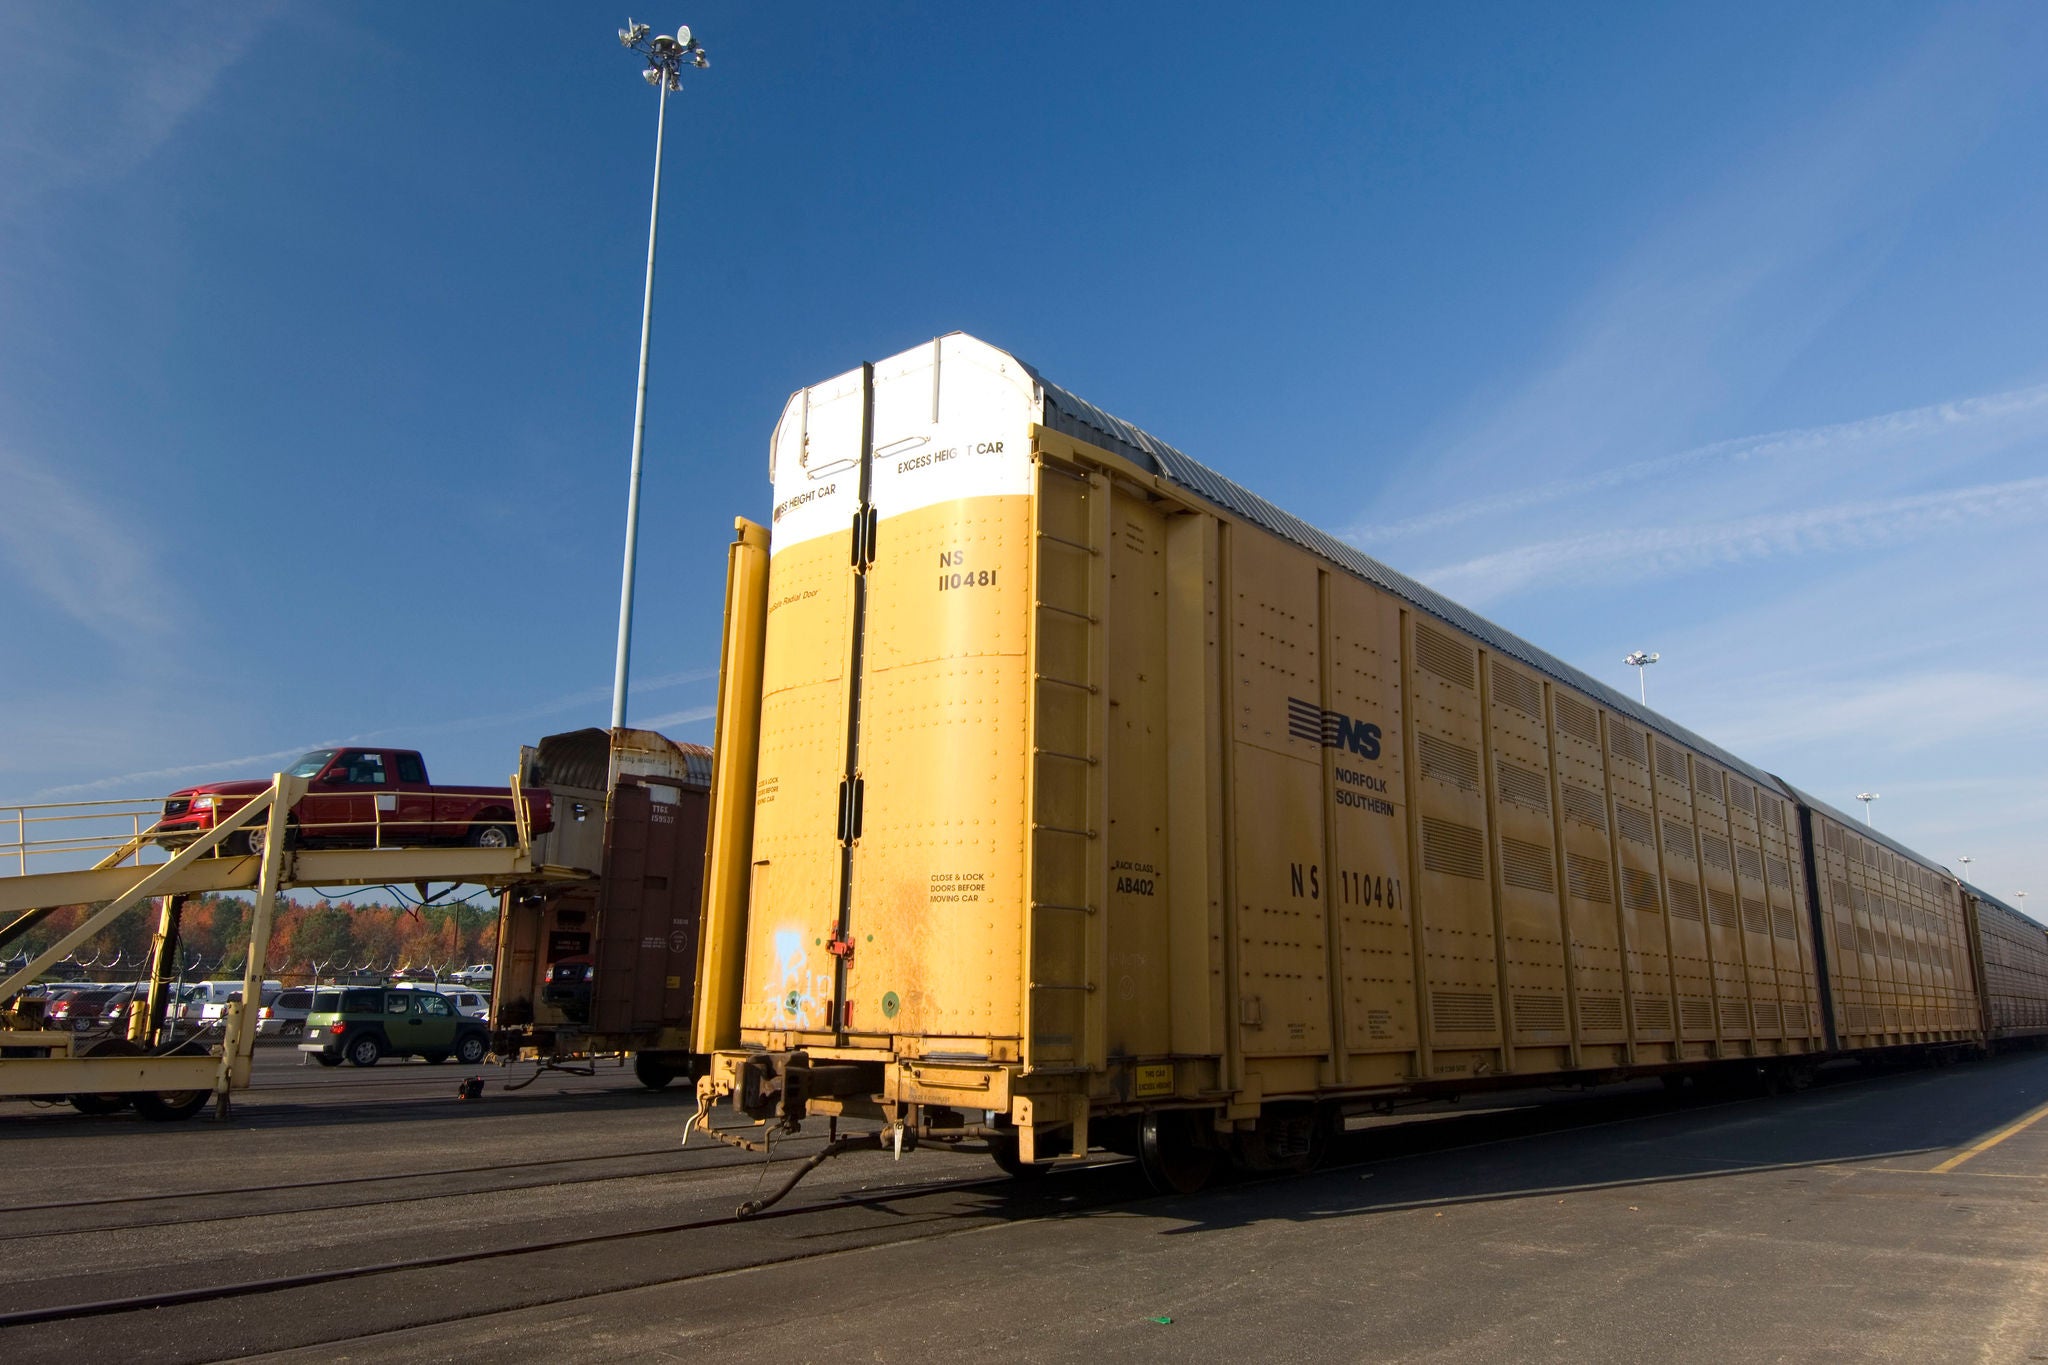 bi-Level train car specifications for shipping intermodal and automotive equipment.